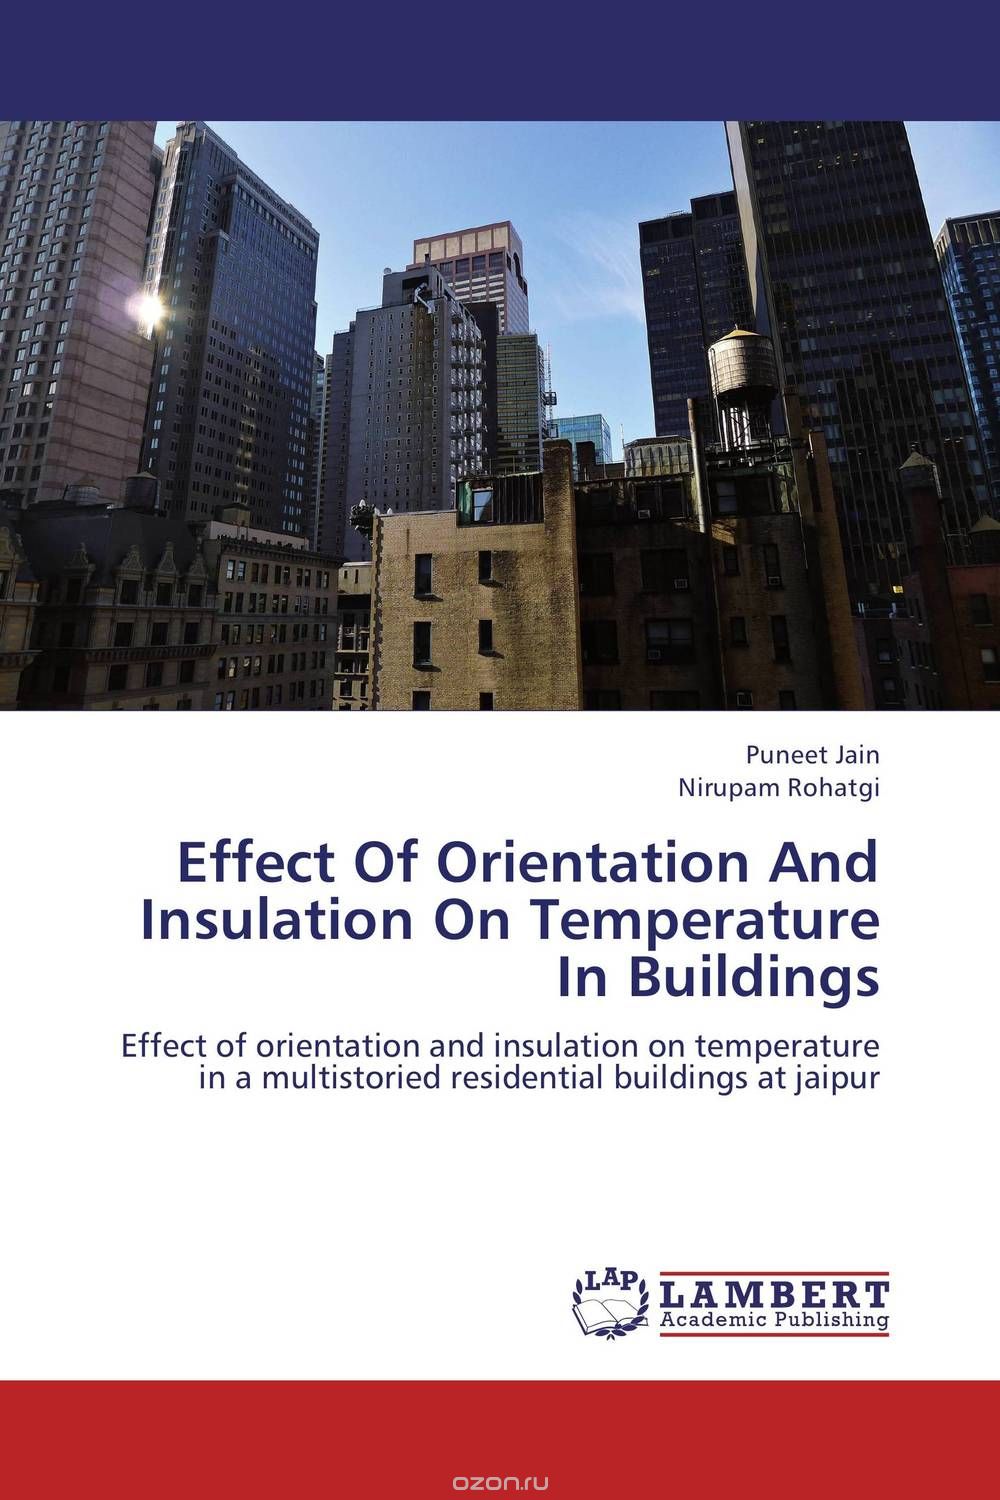 Скачать книгу "Effect Of Orientation And Insulation On Temperature In Buildings"